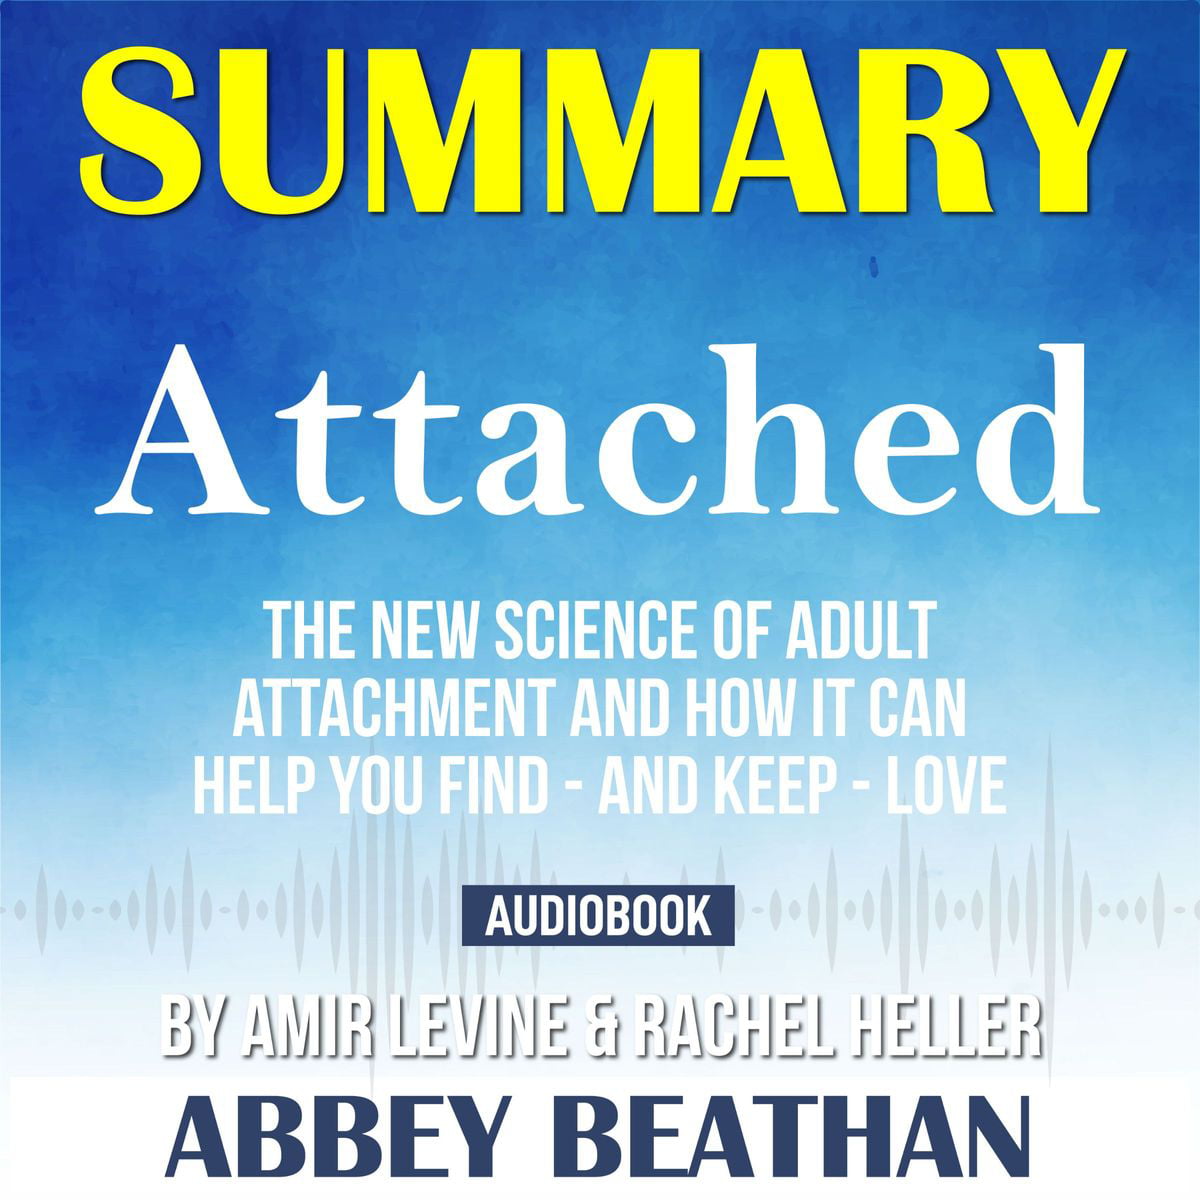 the new science of adult attachment